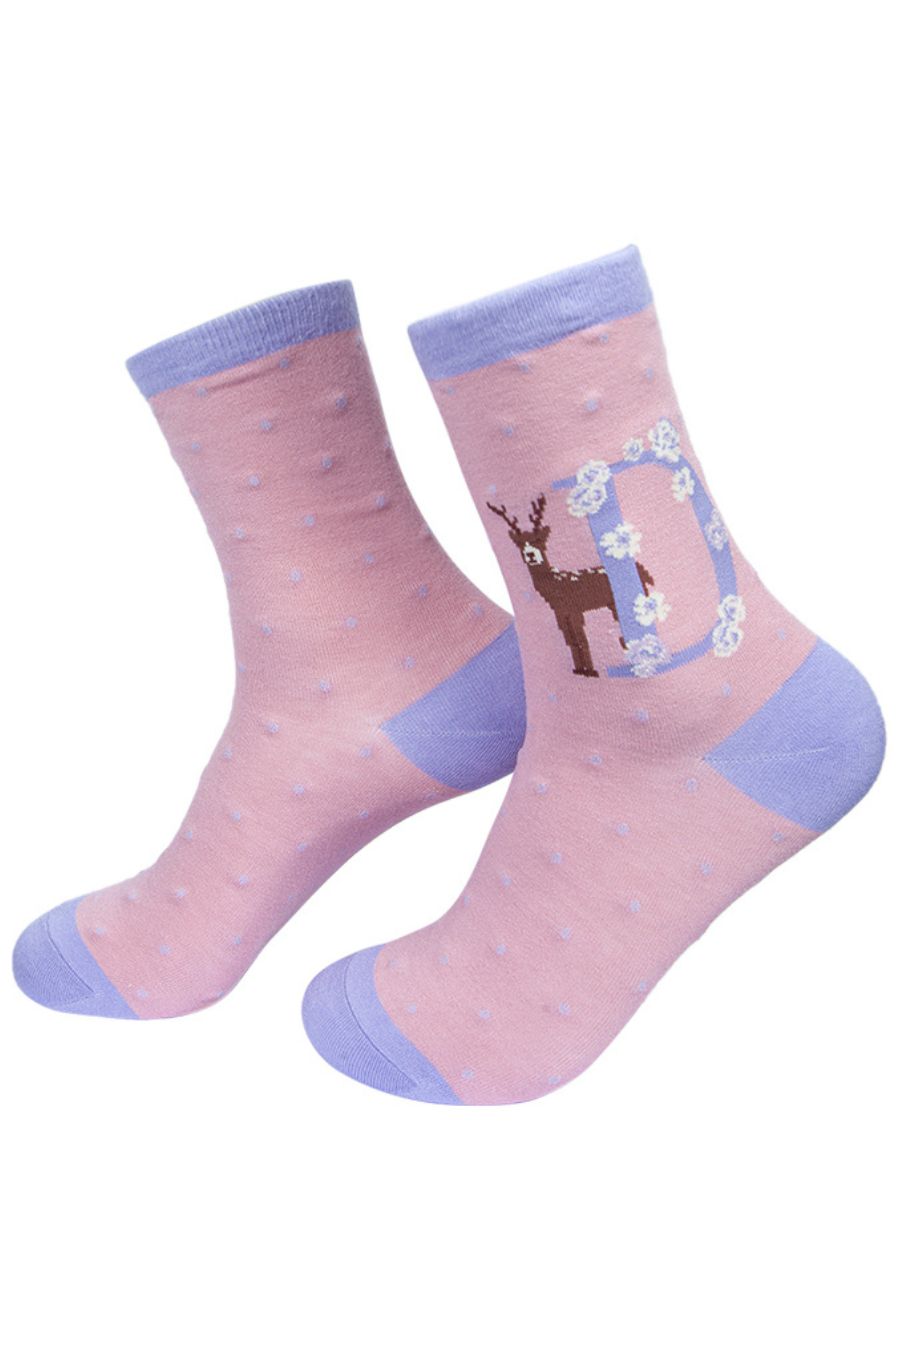 pink, lilac bamboo socks with a letter D and a deer